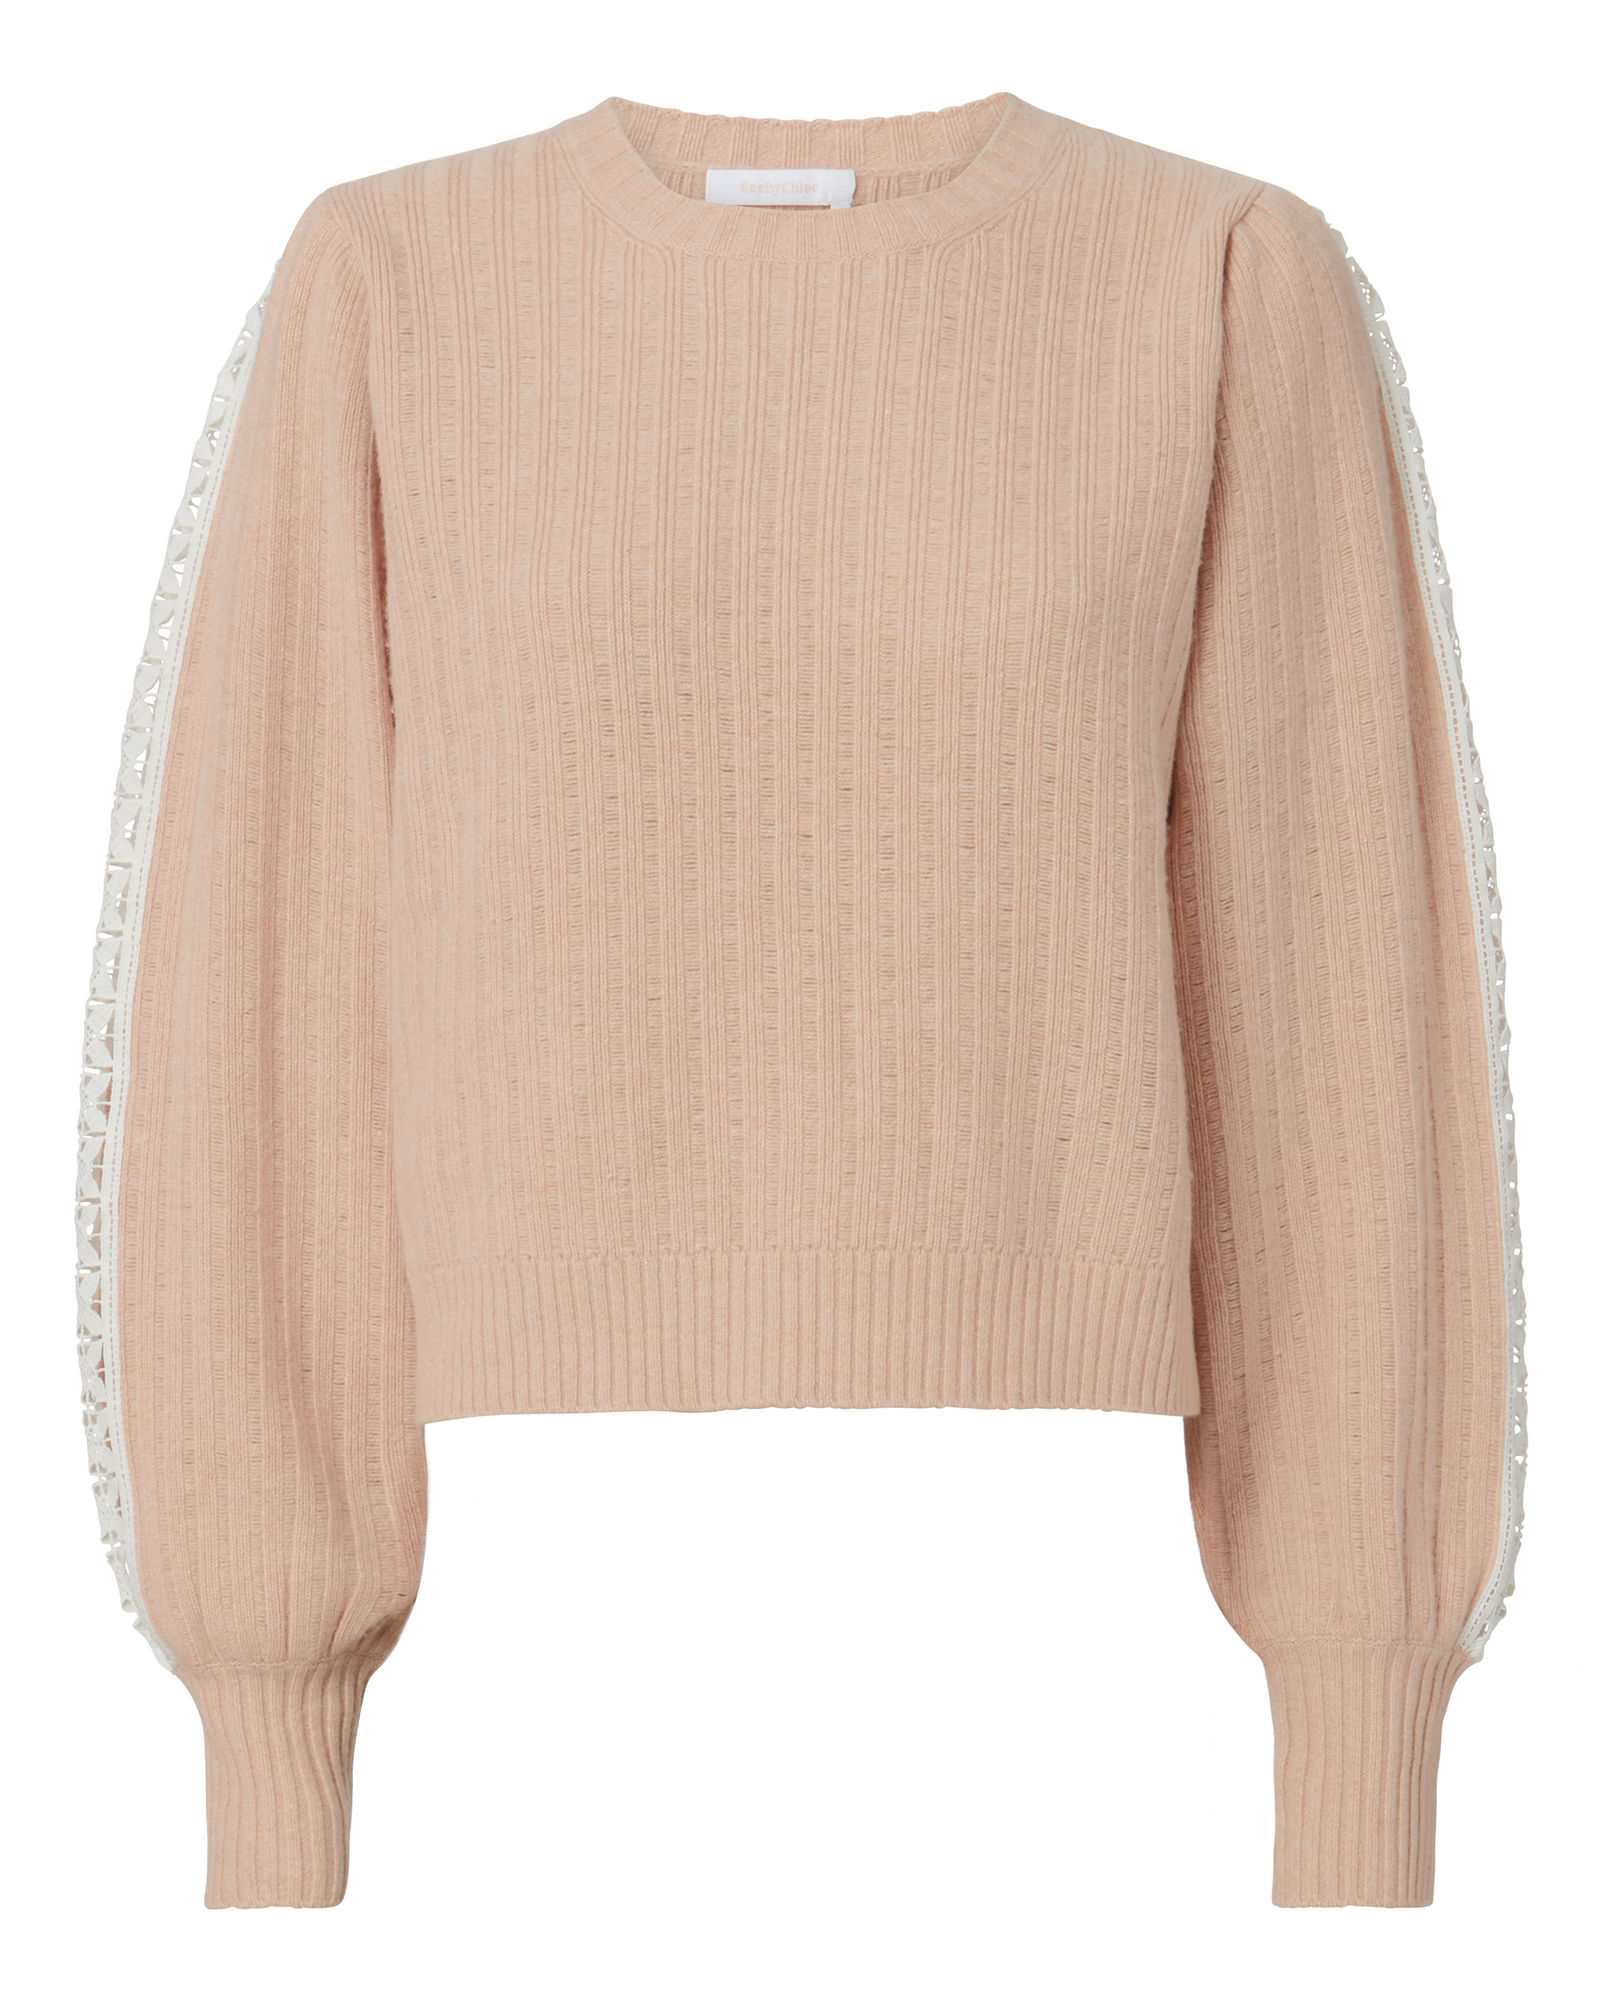 10 Sweaters To Live in This Season